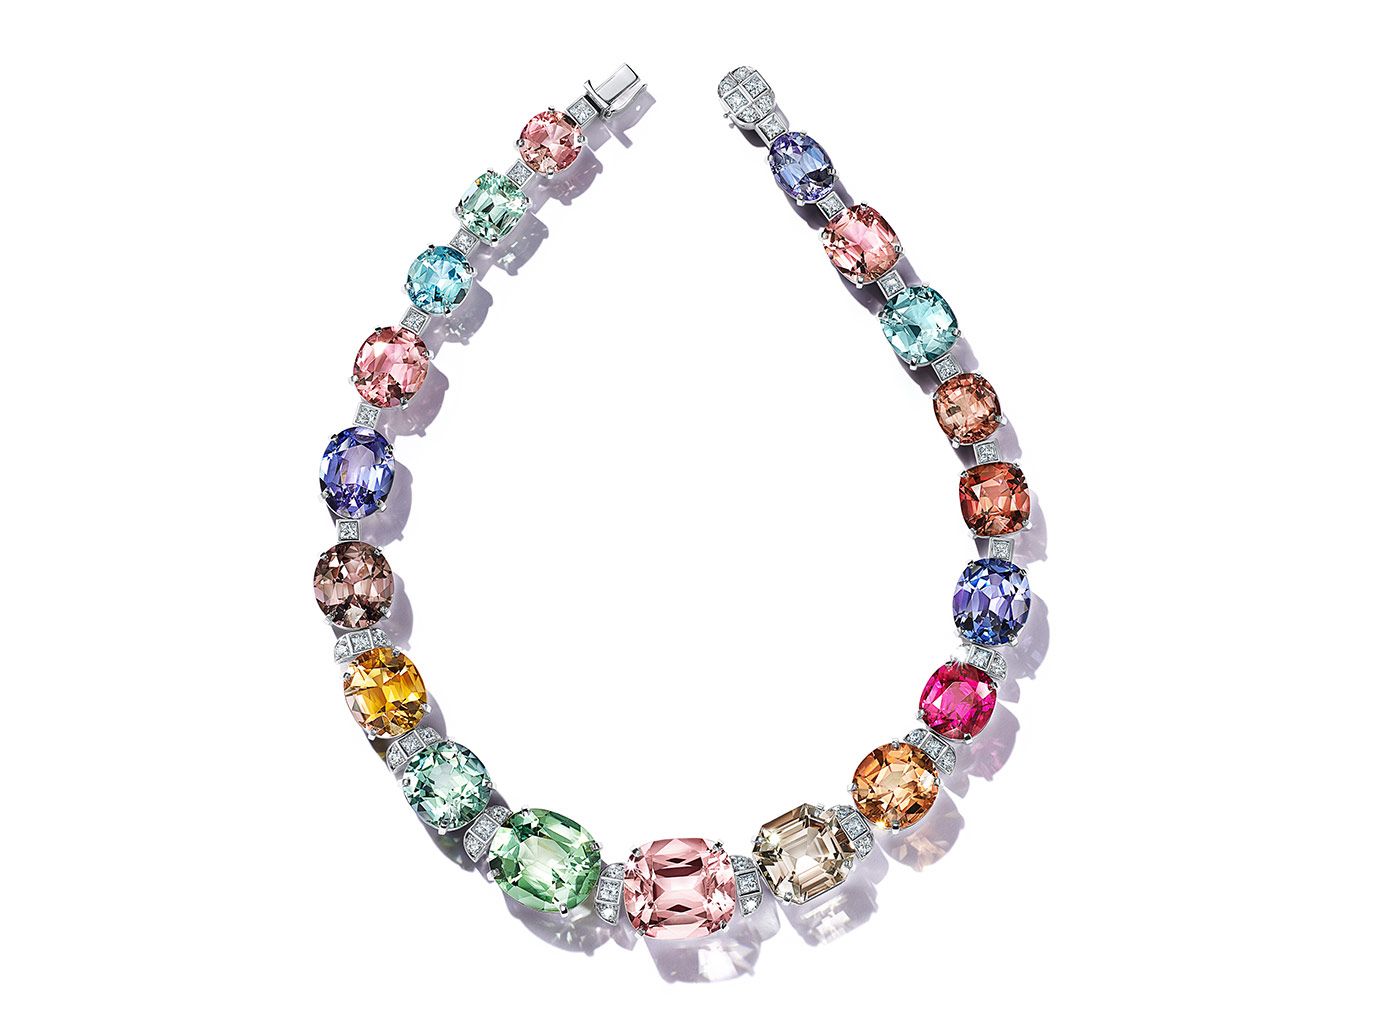 Tiffany & Co. Colors of Nature High Jewellery Earth necklace with aquamarines, tanzanites, pink, orange and green tourmalines, a rubellite and a morganite